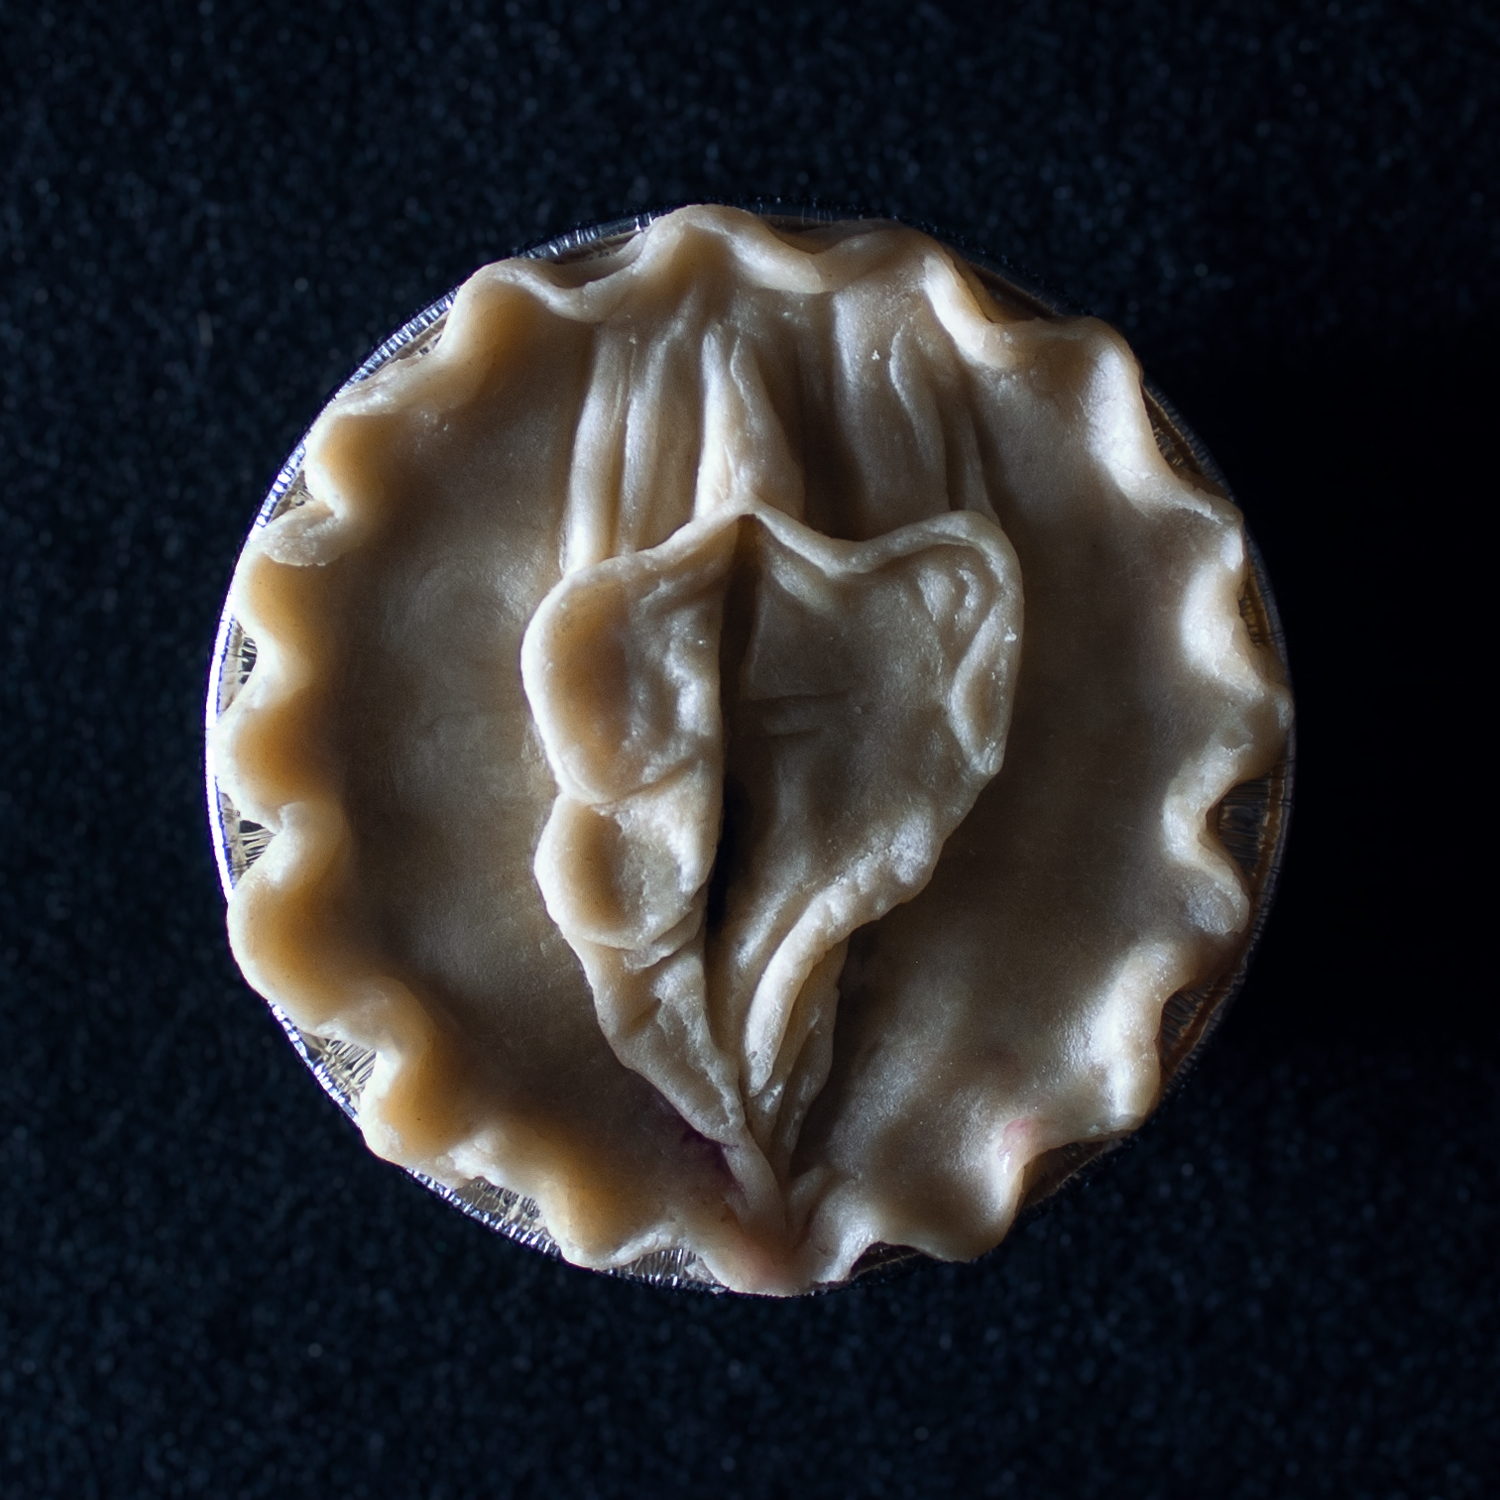 Pie 6, a pie sculpted to appear like a vulva